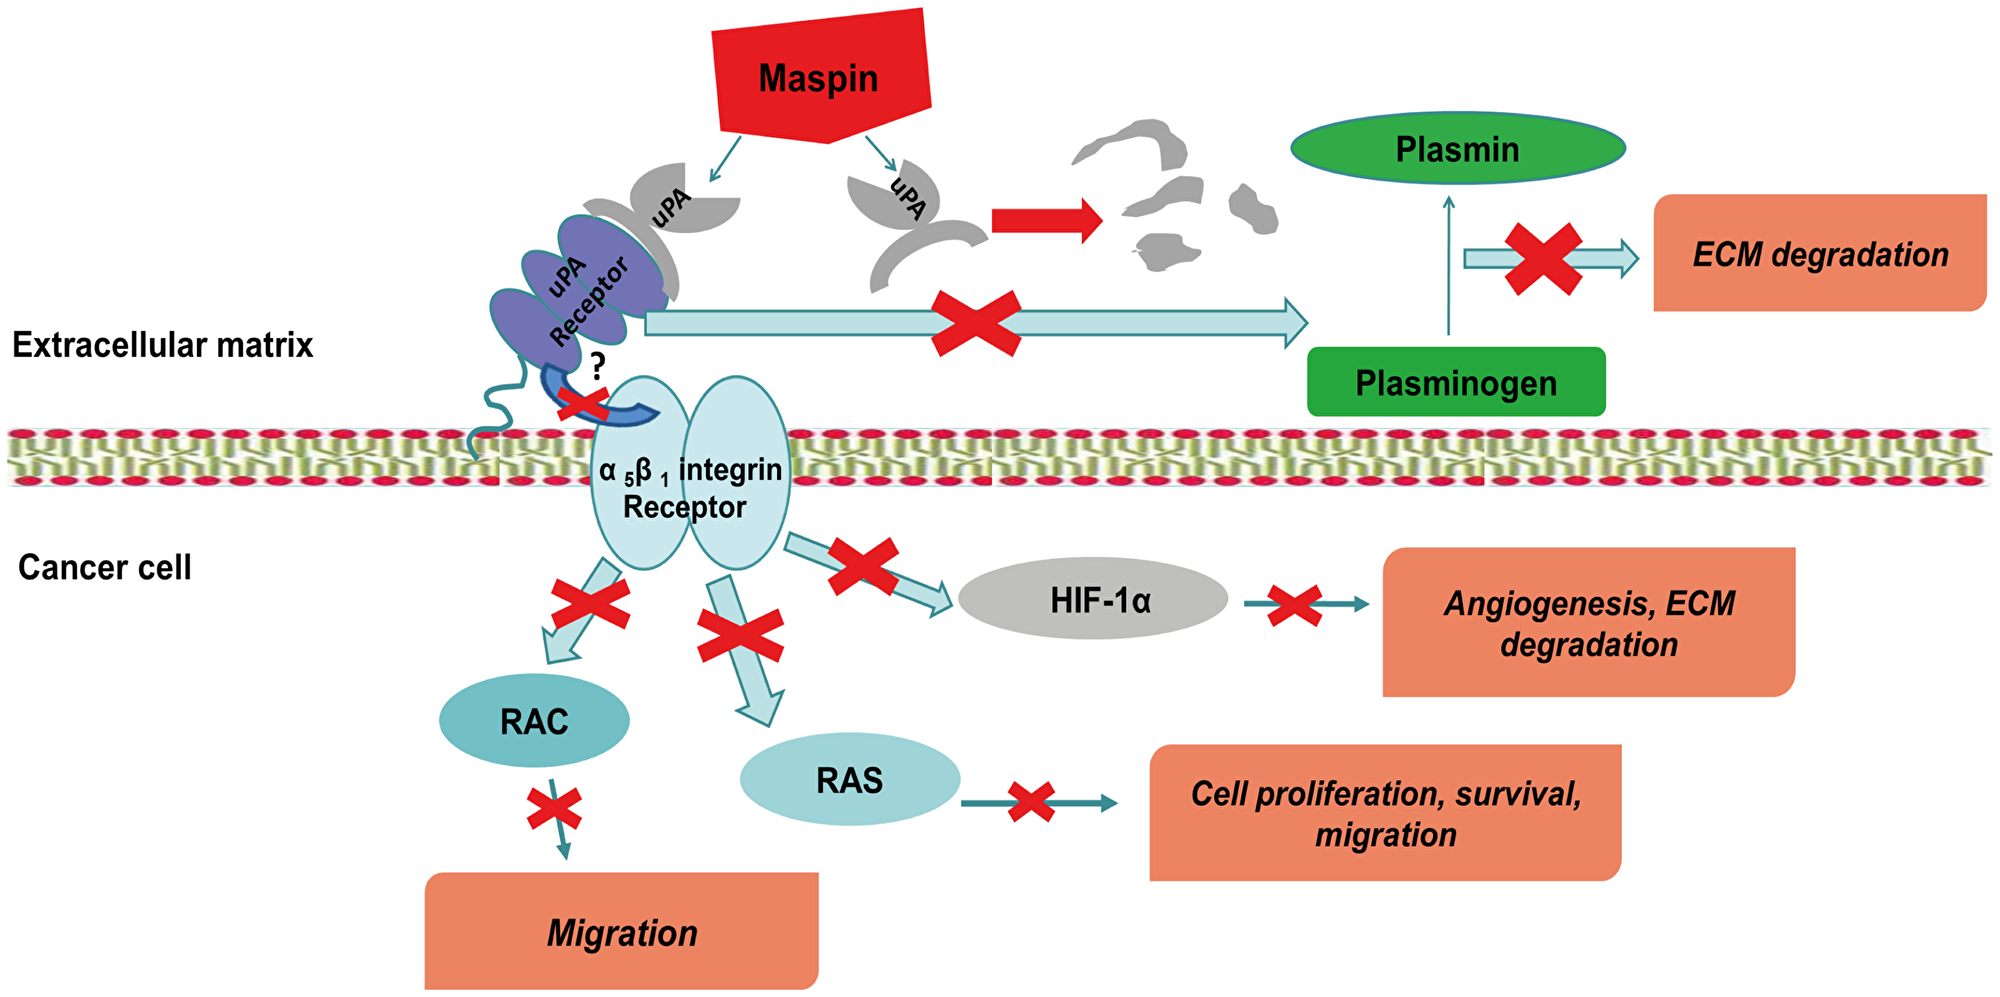 Figure 5: MASPIN can prevent the formation of UPA - UPA-receptor complex by a single step, and thus decrease the possibility of the abnormal degradation of the ECM, the development metastasis and angiogenesis.